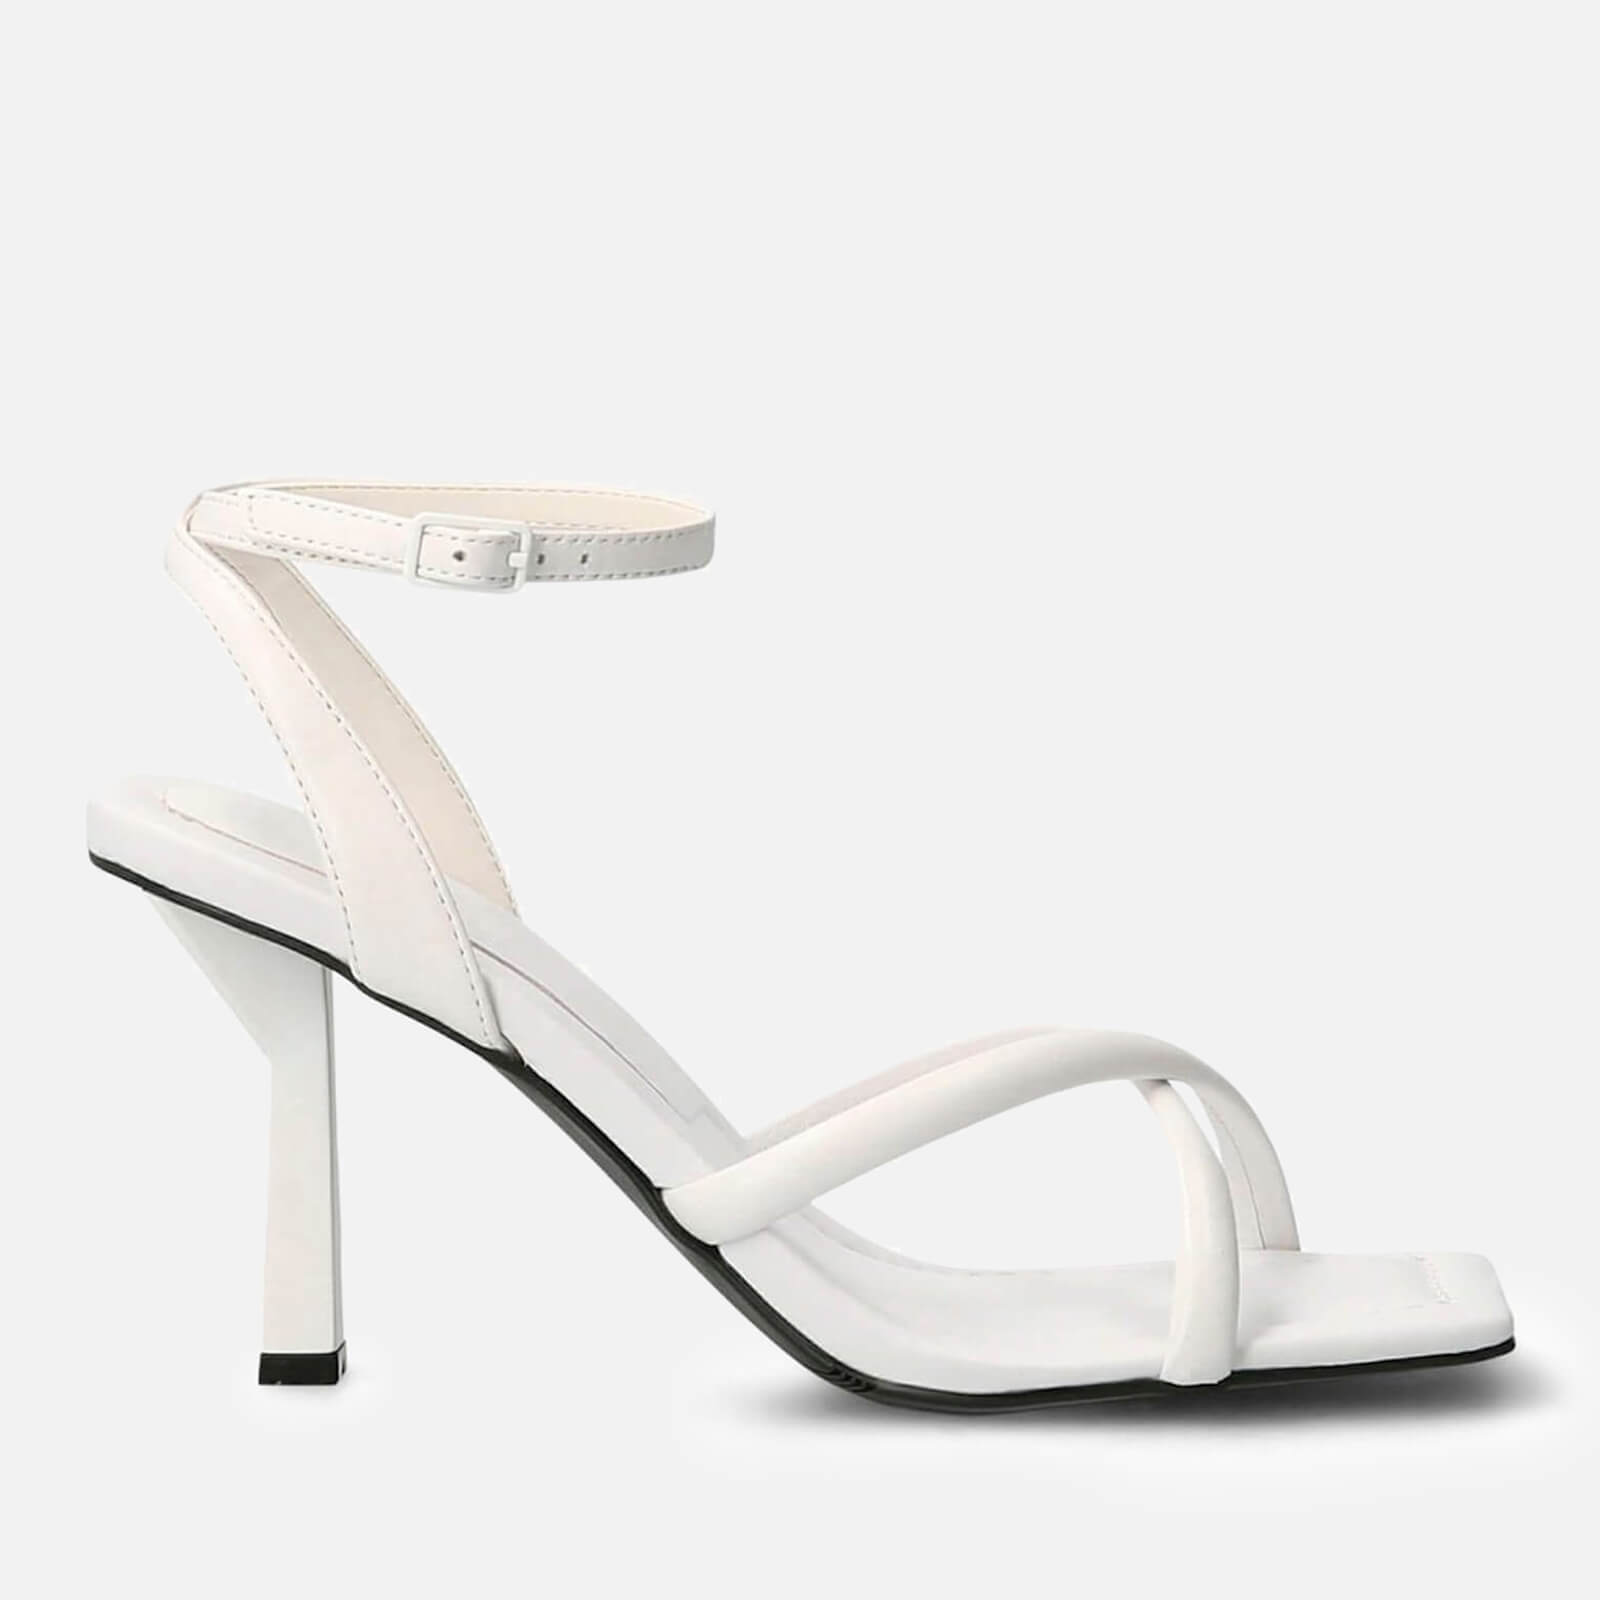 Guess Women’s Dezza Leather Heeled Sandals - White